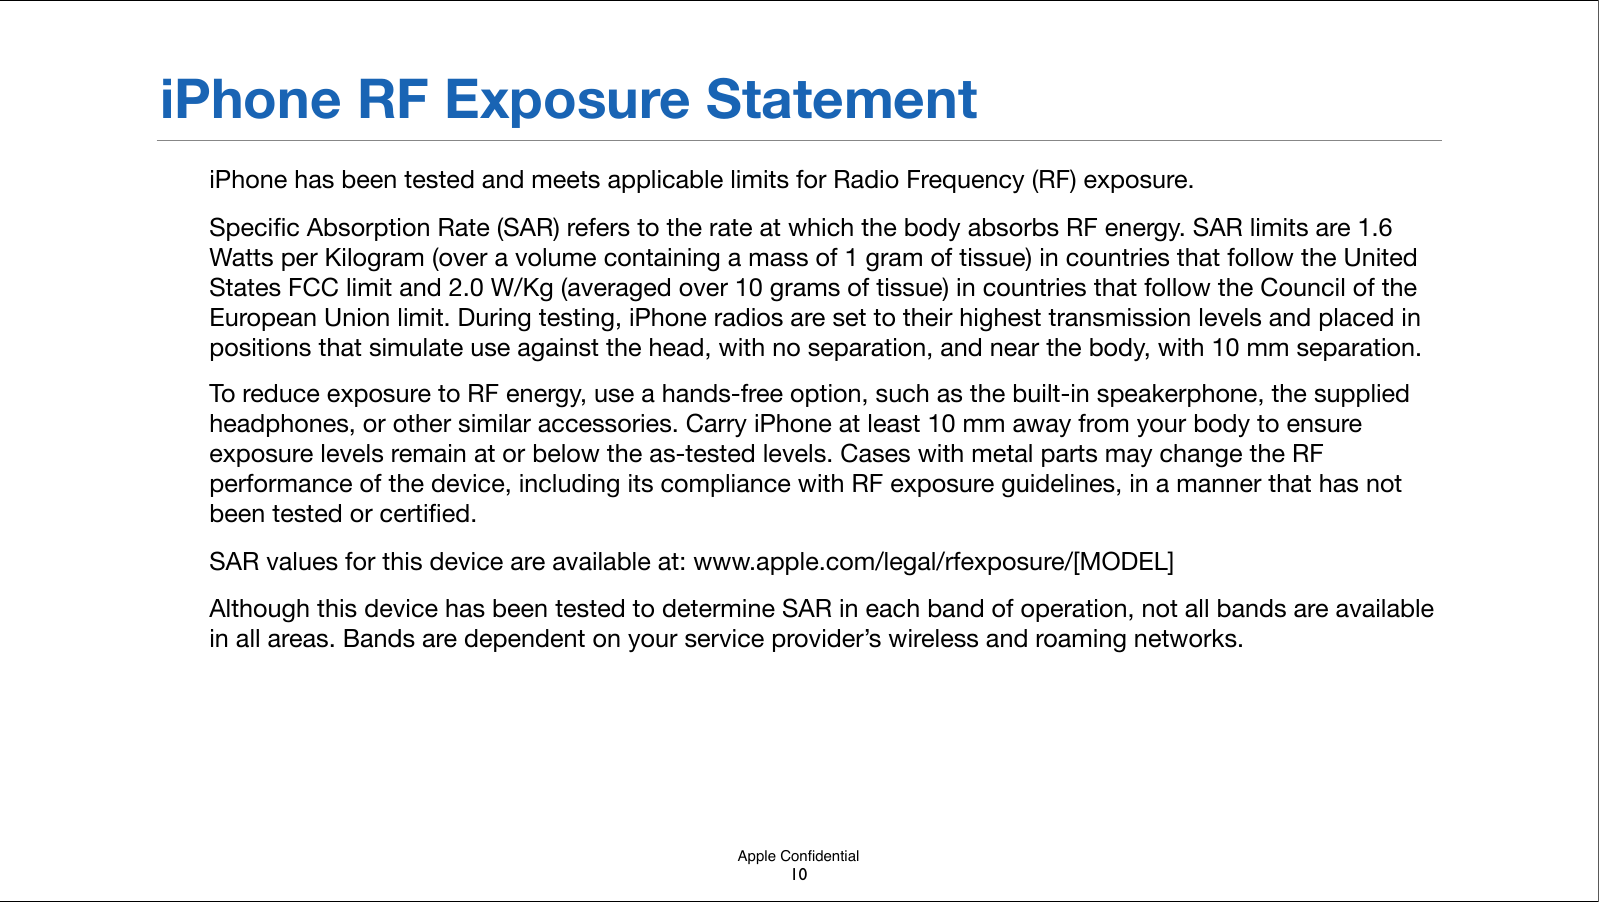 Apple ConﬁdentialiPhone RF Exposure StatementiPhone has been tested and meets applicable limits for Radio Frequency (RF) exposure.Speciﬁc Absorption Rate (SAR) refers to the rate at which the body absorbs RF energy. SAR limits are 1.6 Watts per Kilogram (over a volume containing a mass of 1 gram of tissue) in countries that follow the United States FCC limit and 2.0 W/Kg (averaged over 10 grams of tissue) in countries that follow the Council of the European Union limit. During testing, iPhone radios are set to their highest transmission levels and placed in positions that simulate use against the head, with no separation, and near the body, with 10 mm separation.To reduce exposure to RF energy, use a hands-free option, such as the built-in speakerphone, the supplied headphones, or other similar accessories.!Carry iPhone at least 10 mm away from your body to ensure exposure levels remain at or below the as-tested levels. Cases with metal parts may change the RF performance of the device, including its compliance with RF exposure guidelines, in a manner that has not been!tested or certiﬁed.SAR values for this device are available at: www.apple.com/legal/rfexposure/[MODEL]Although this device has been tested to determine SAR in each band of operation, not all bands are available in all areas. Bands are dependent on your service provider’s wireless and roaming networks.  10